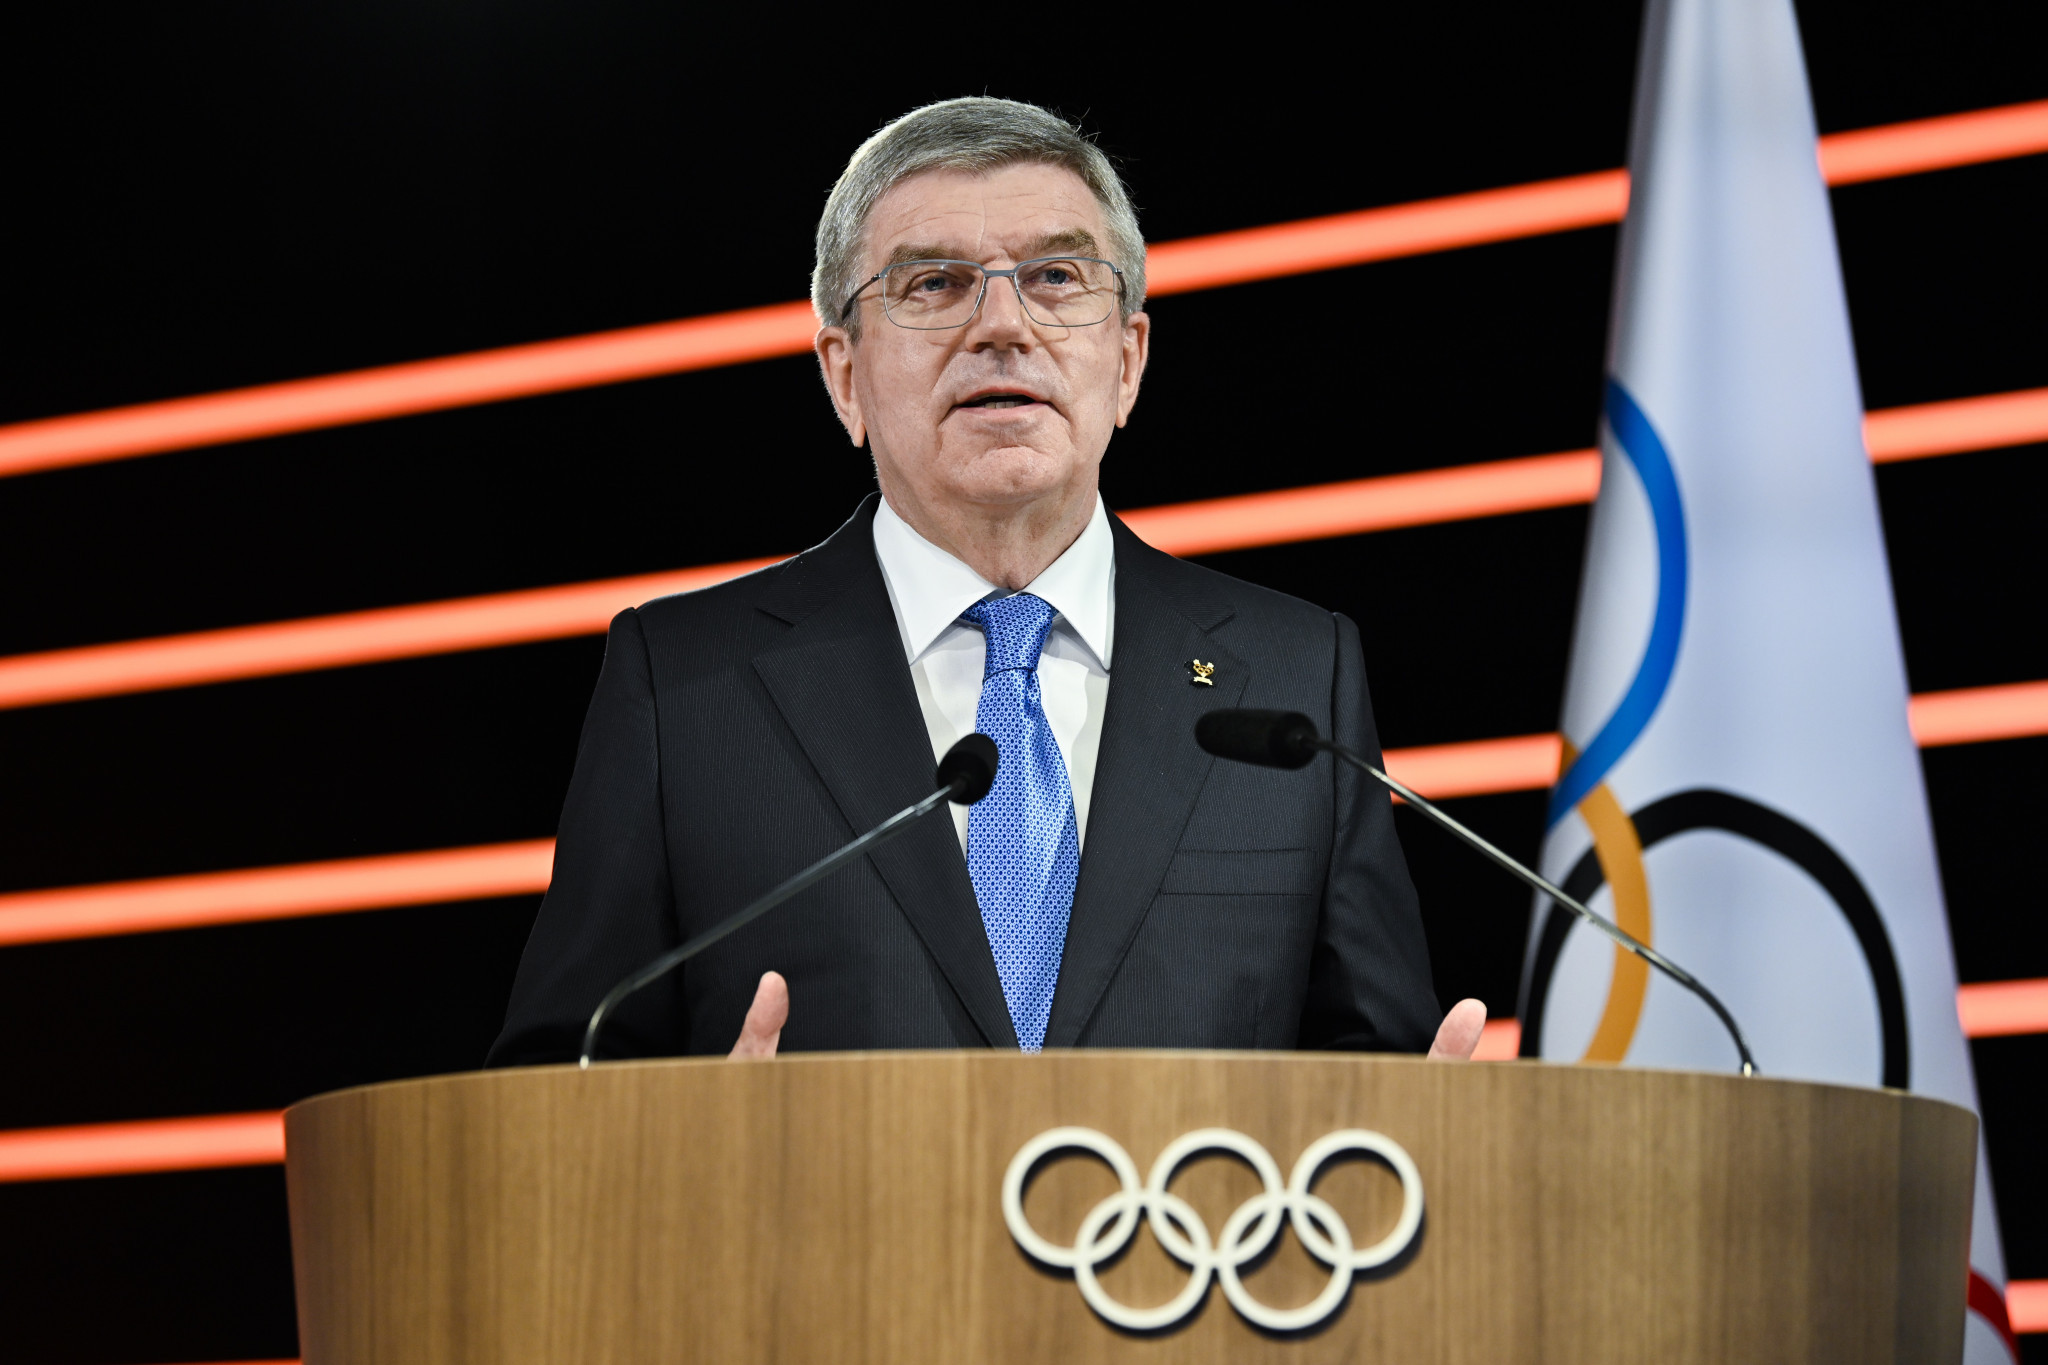 Bach "not amused" by IBA election fiasco as boxing’s Olympic future remains uncertain